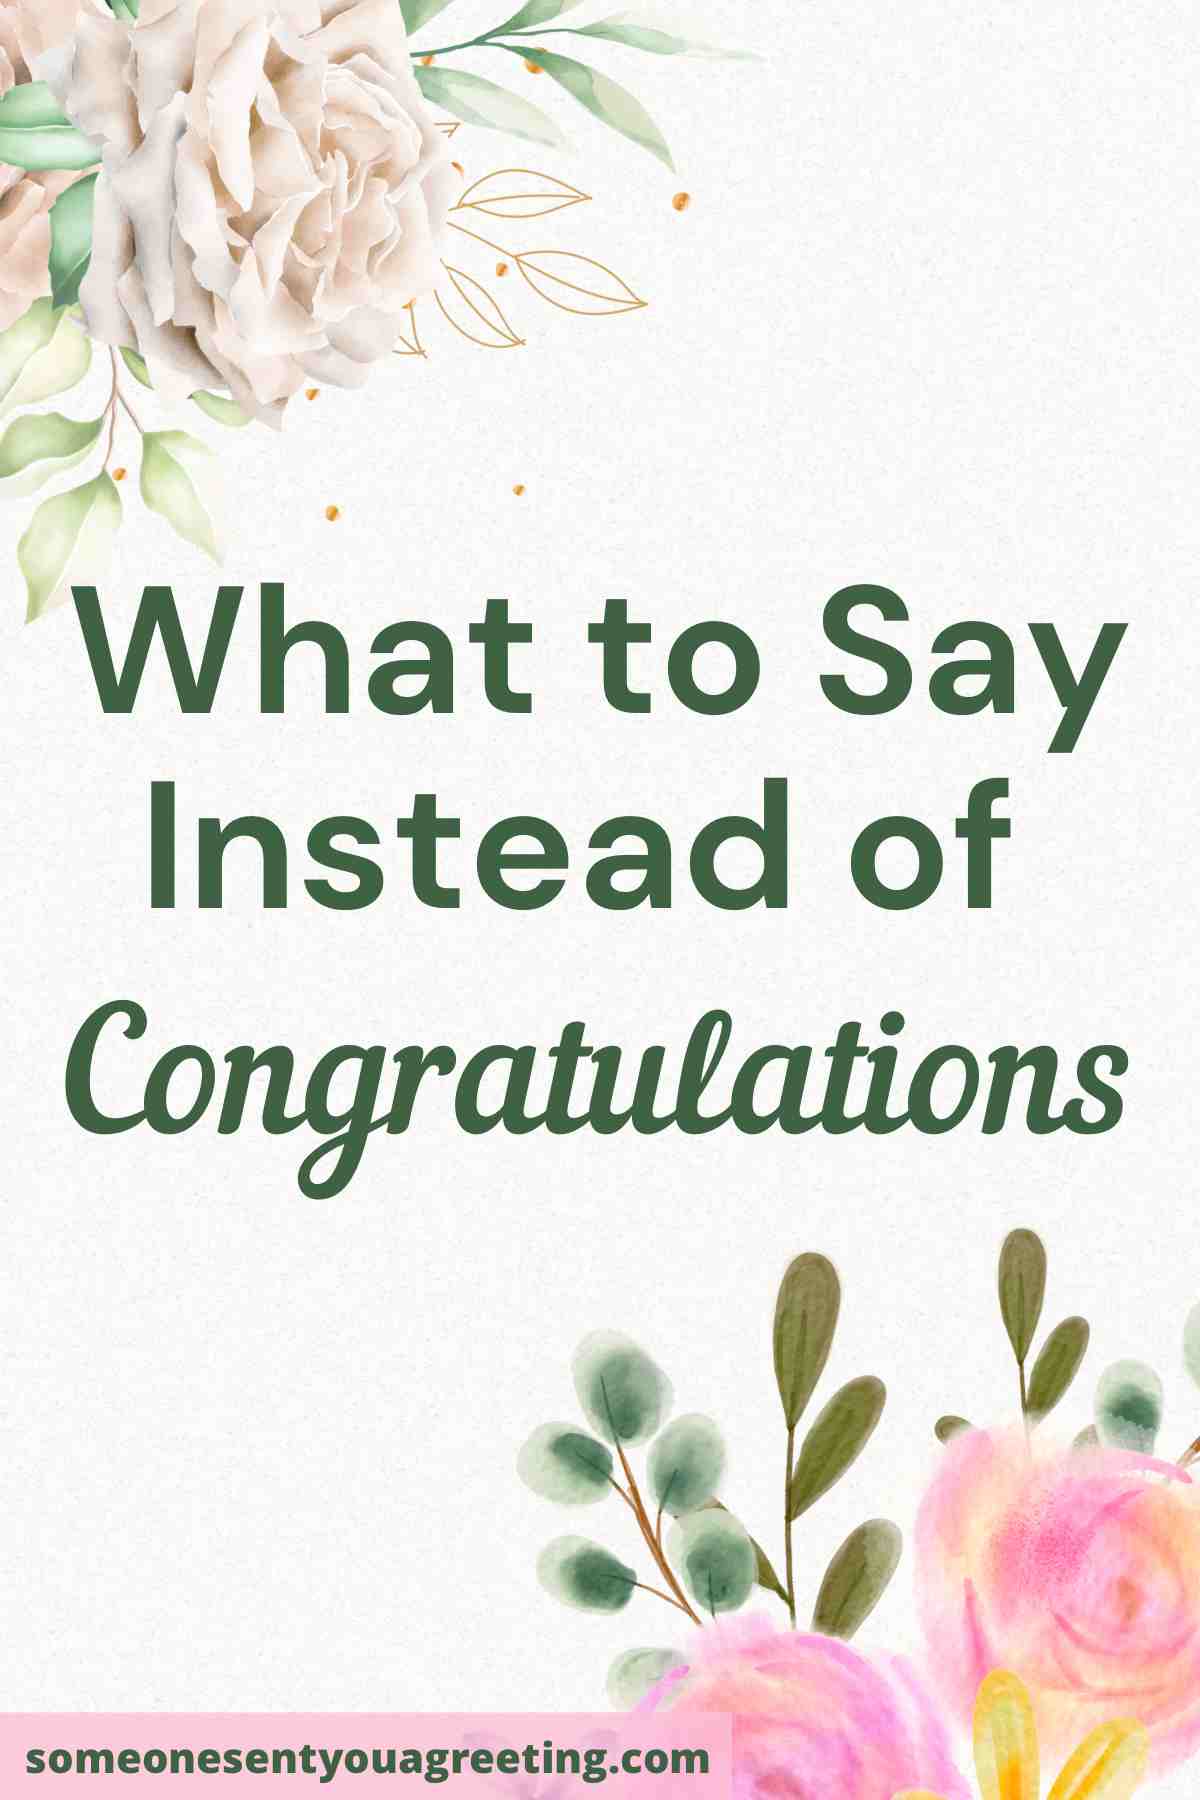 What to say instead of congratulations